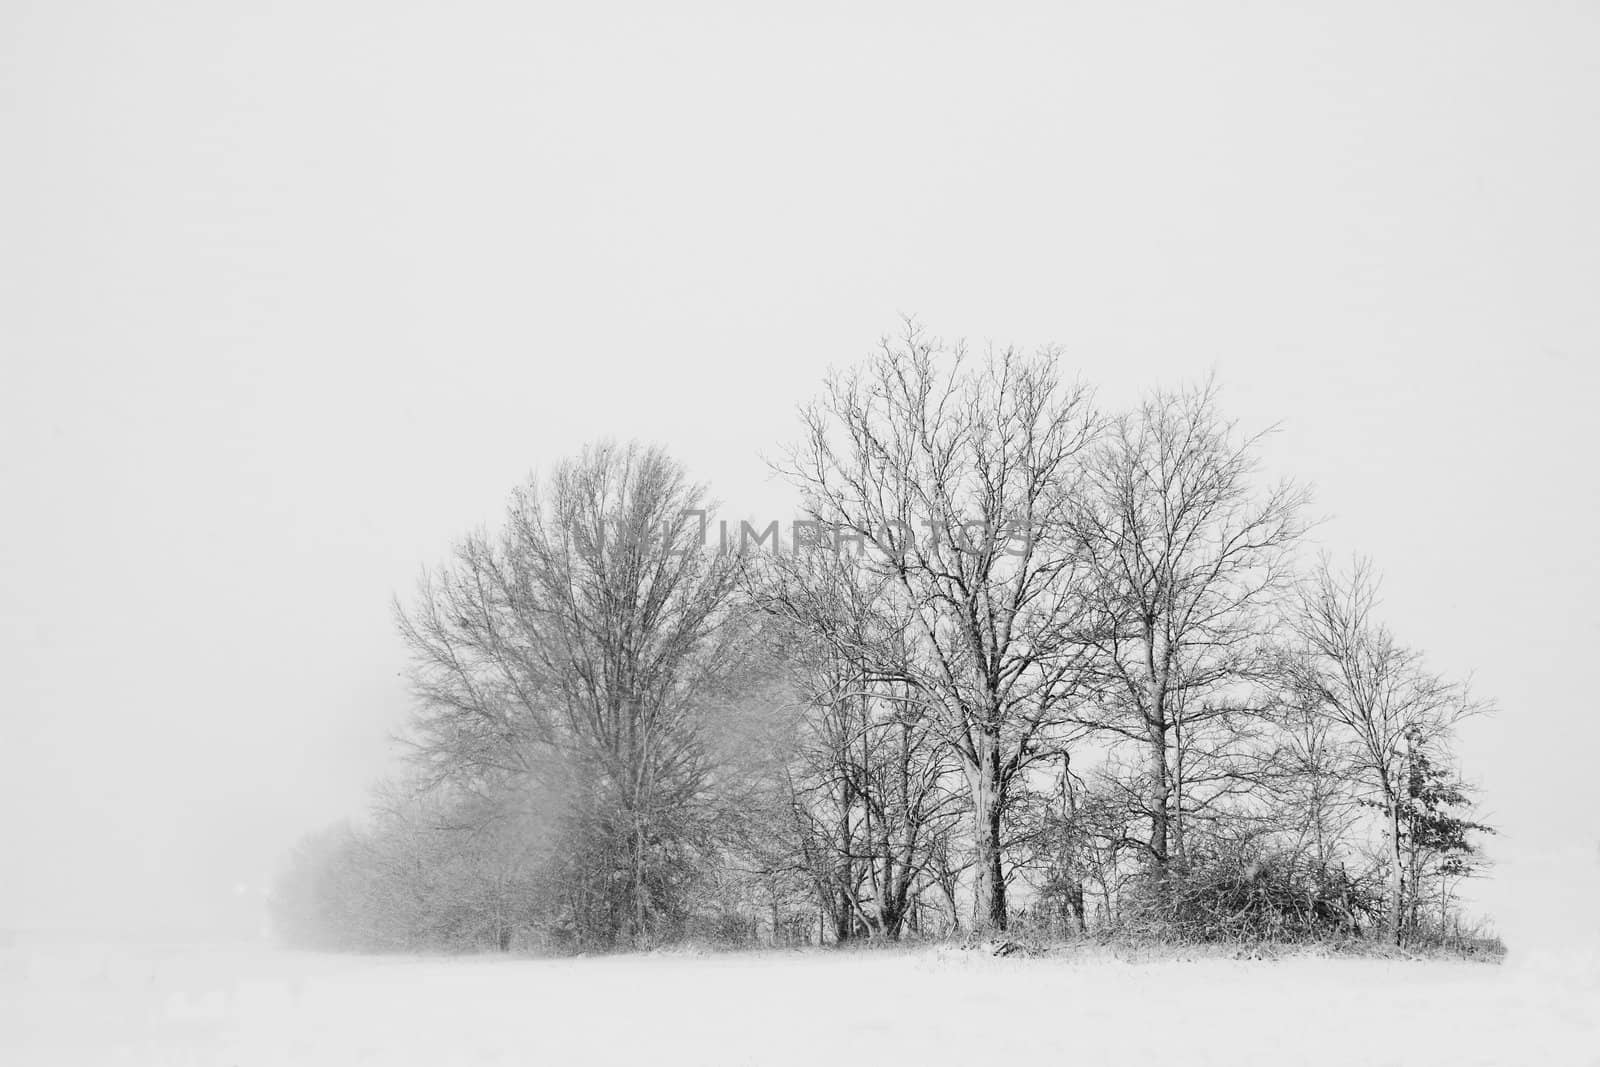 Trees in a snow storm by jasony00